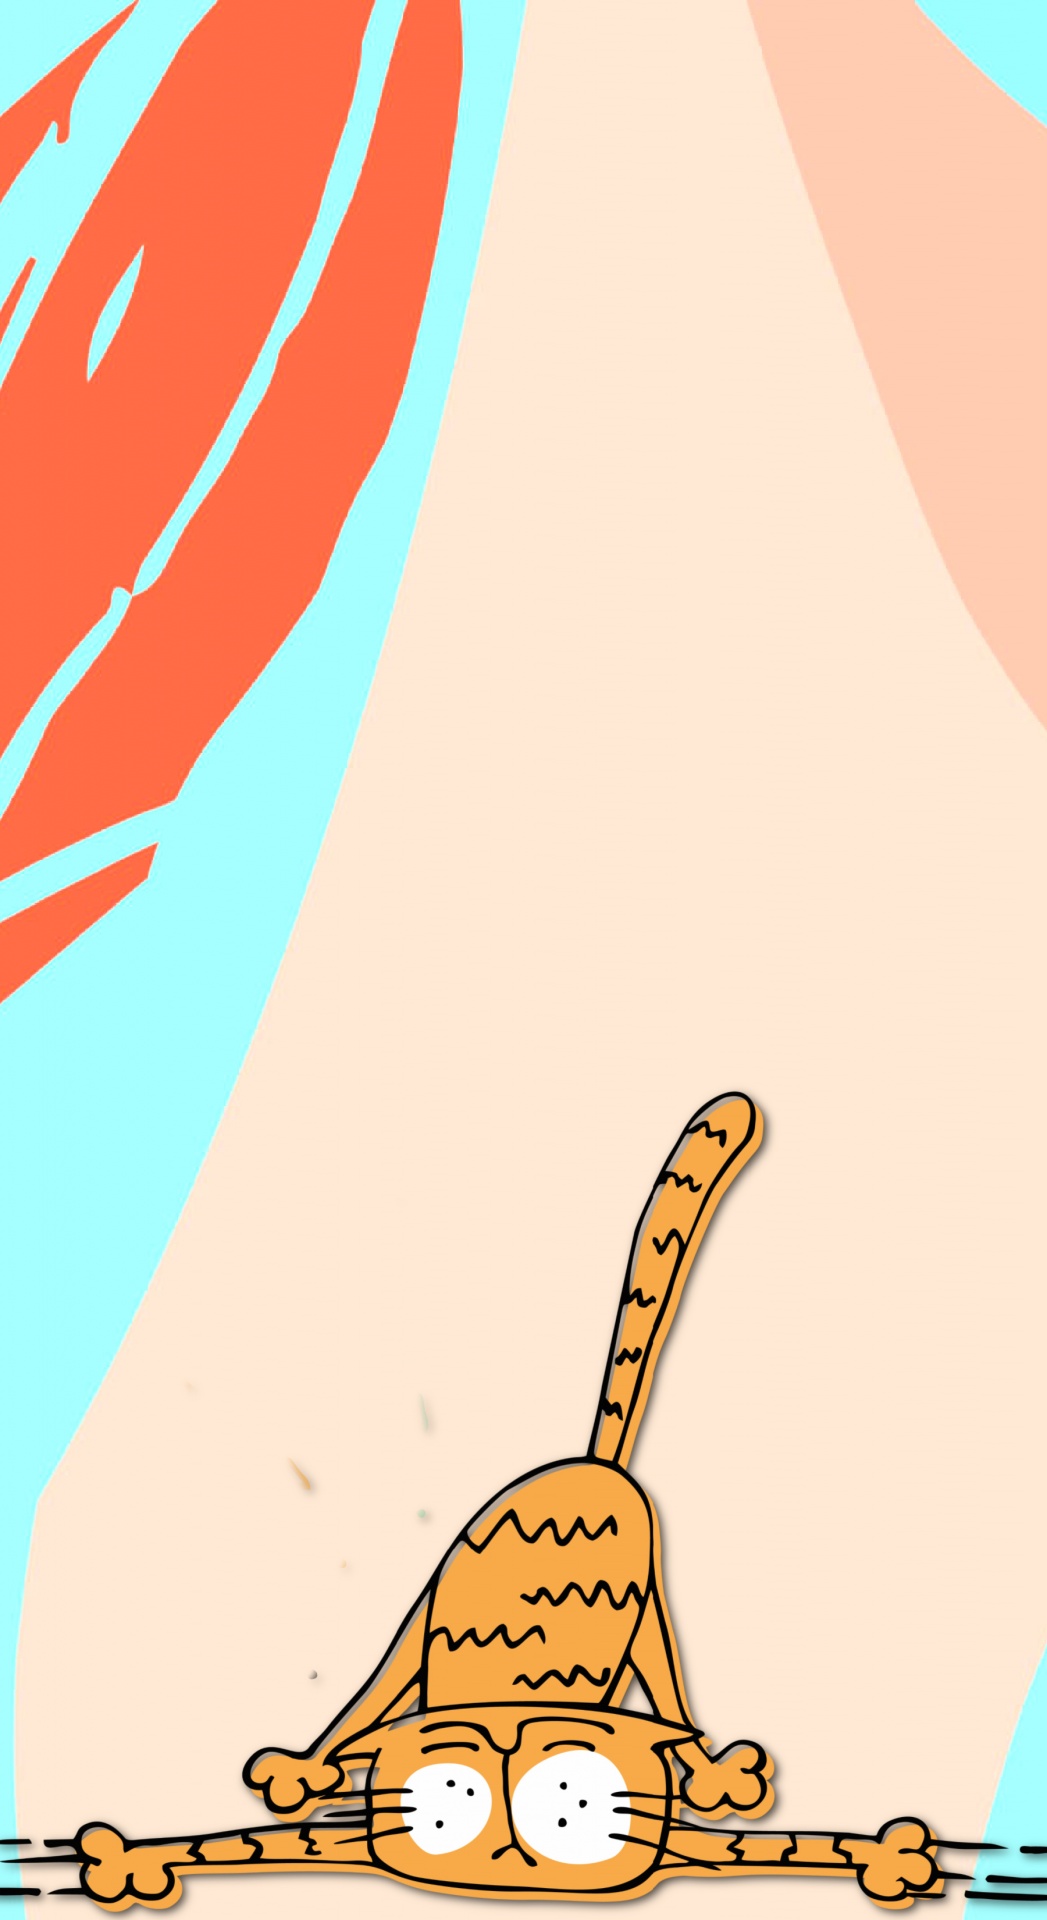 cartoon ginger cat stretched out on abstract background